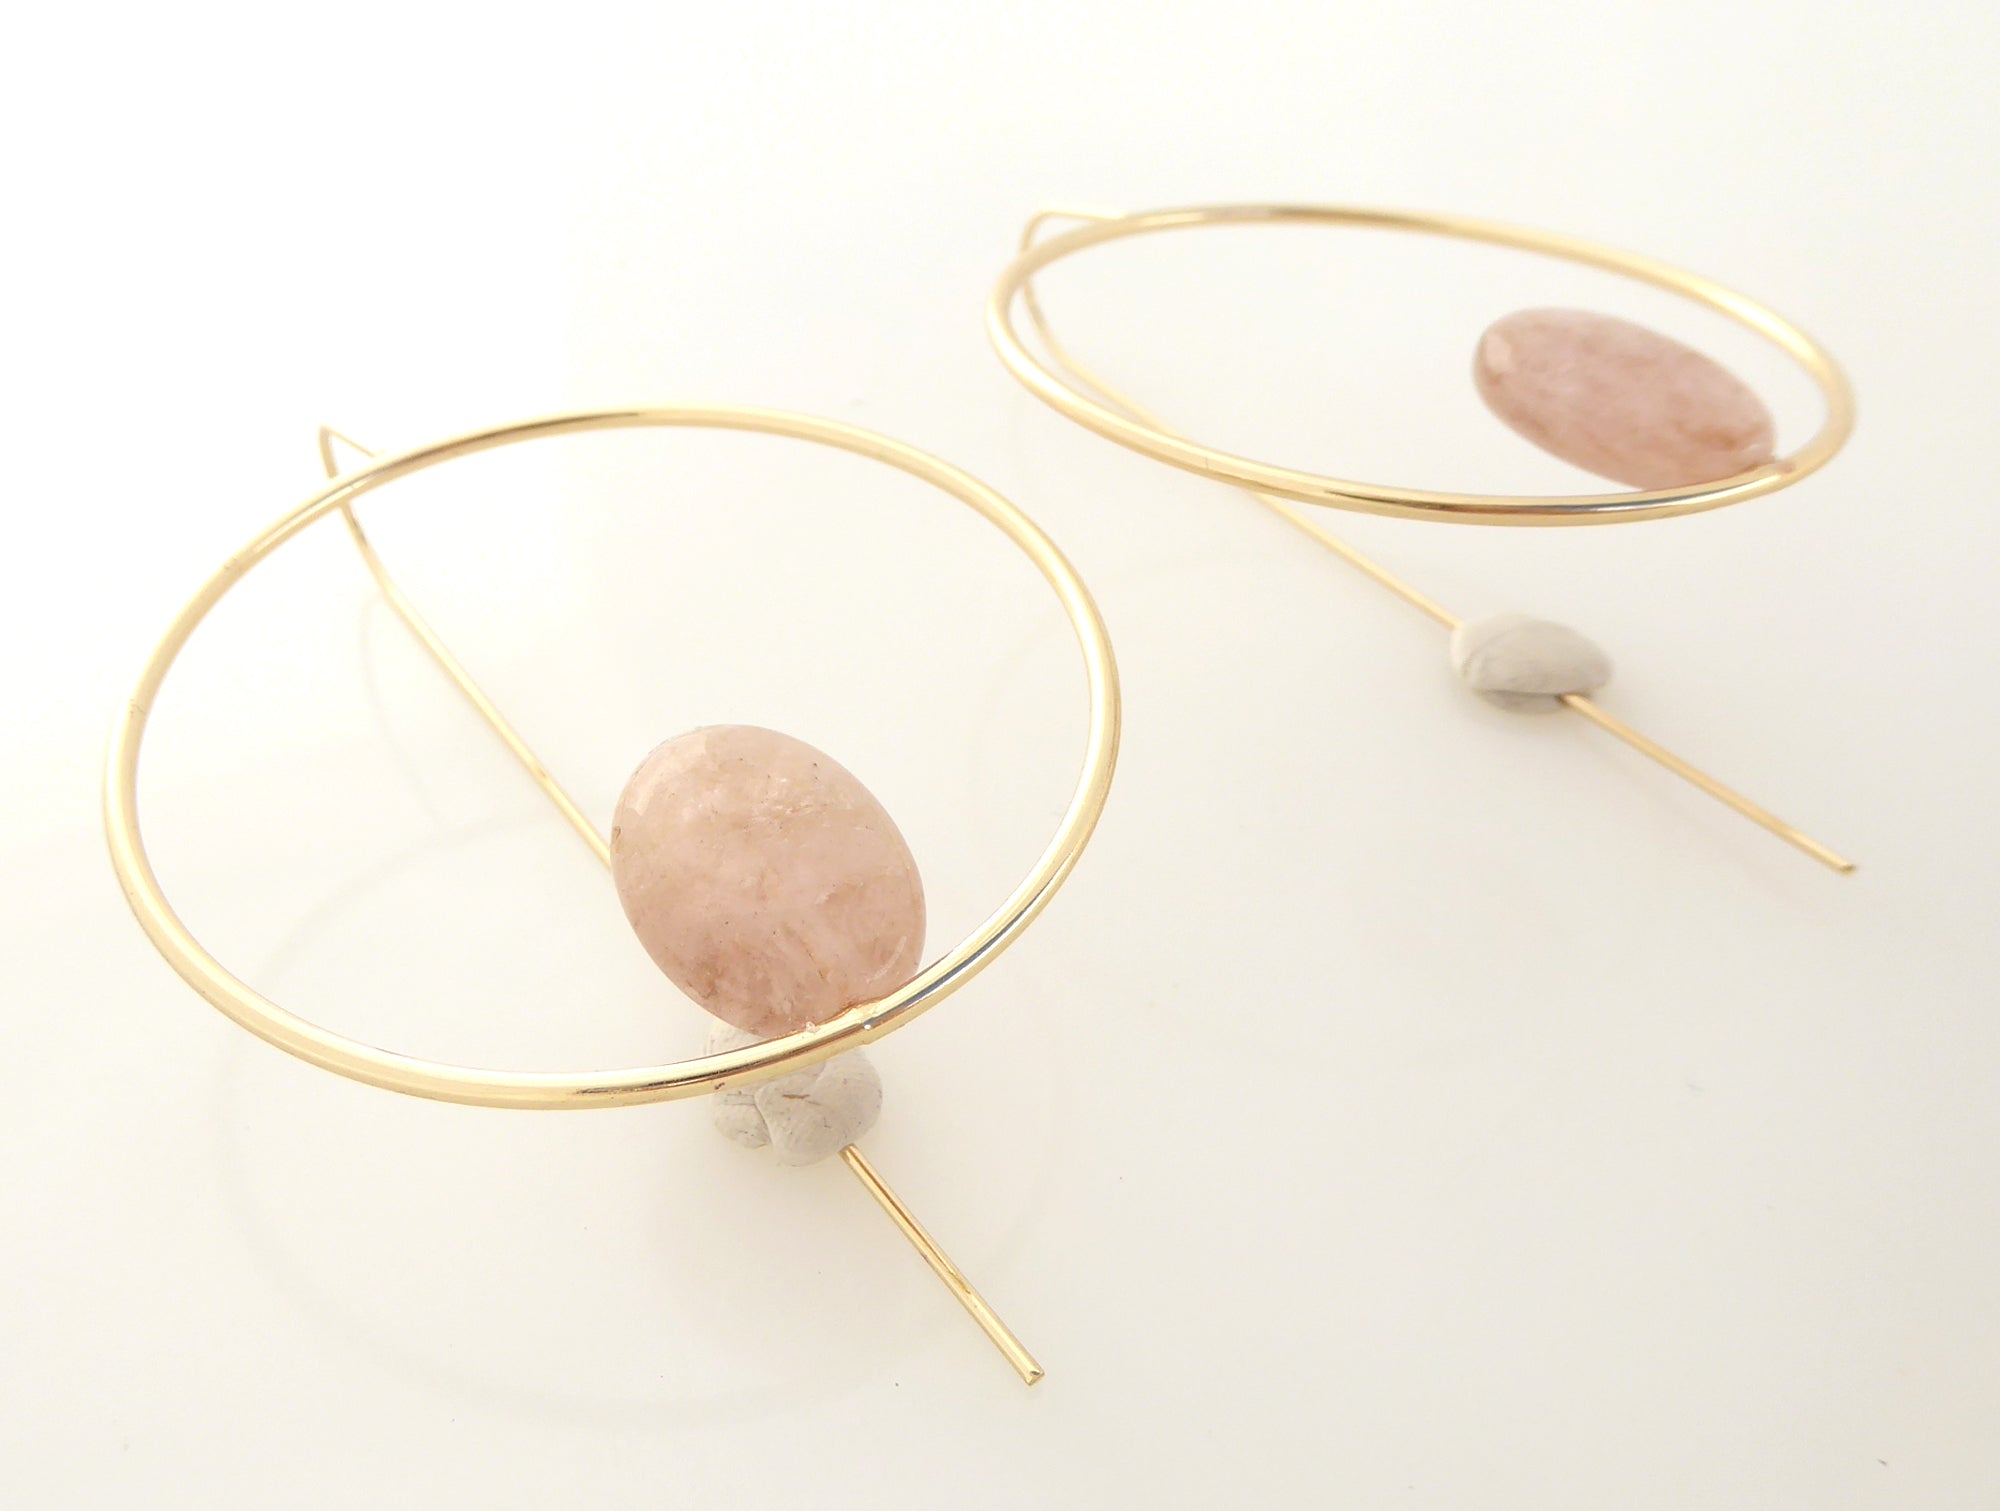 Morganite and gold geometric wire circle earrings by Jenny Dayco 2